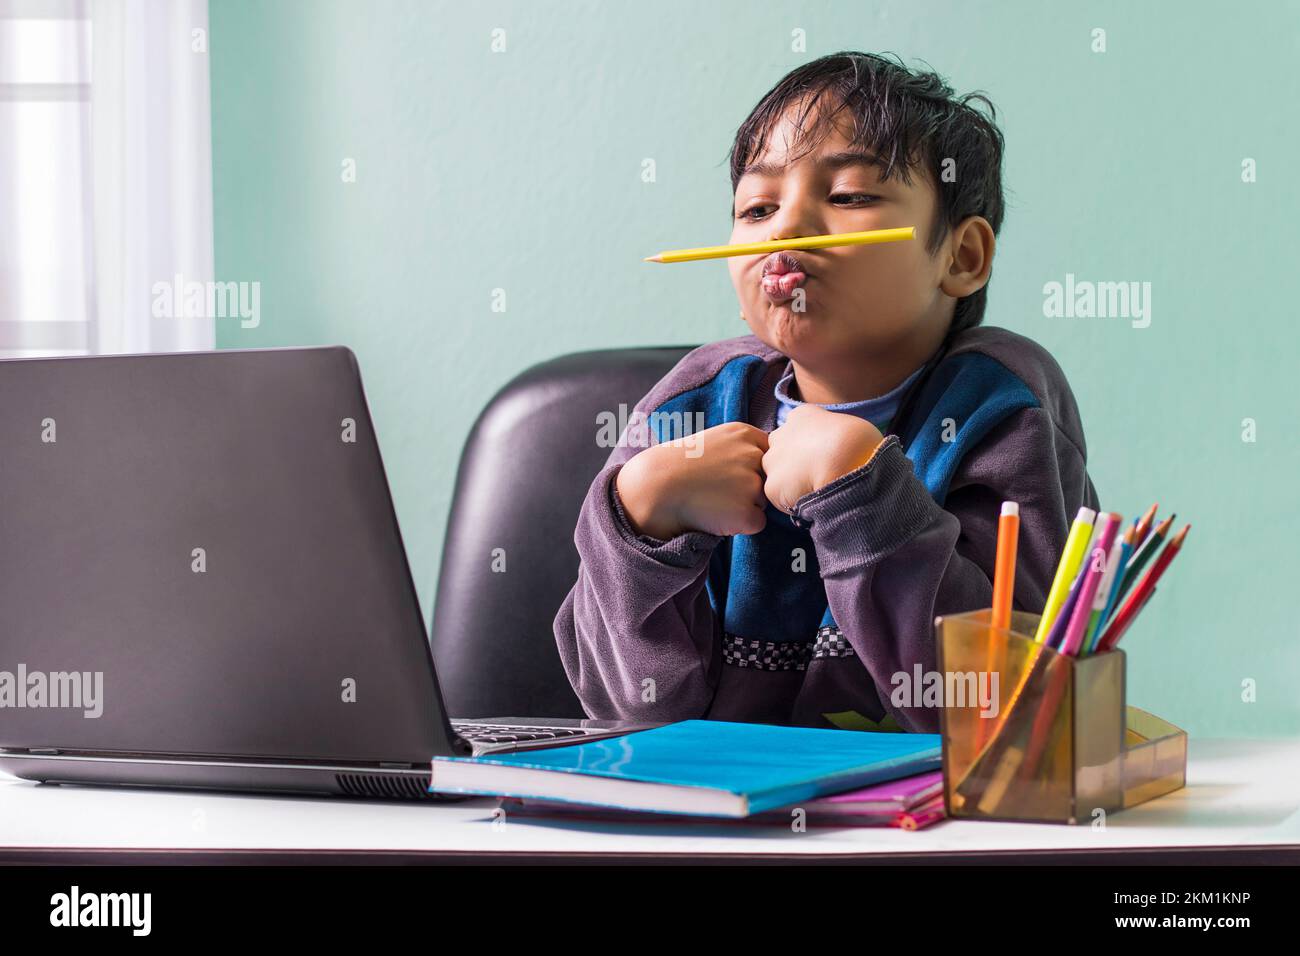 Boy with pencil under his nose Stock Photo